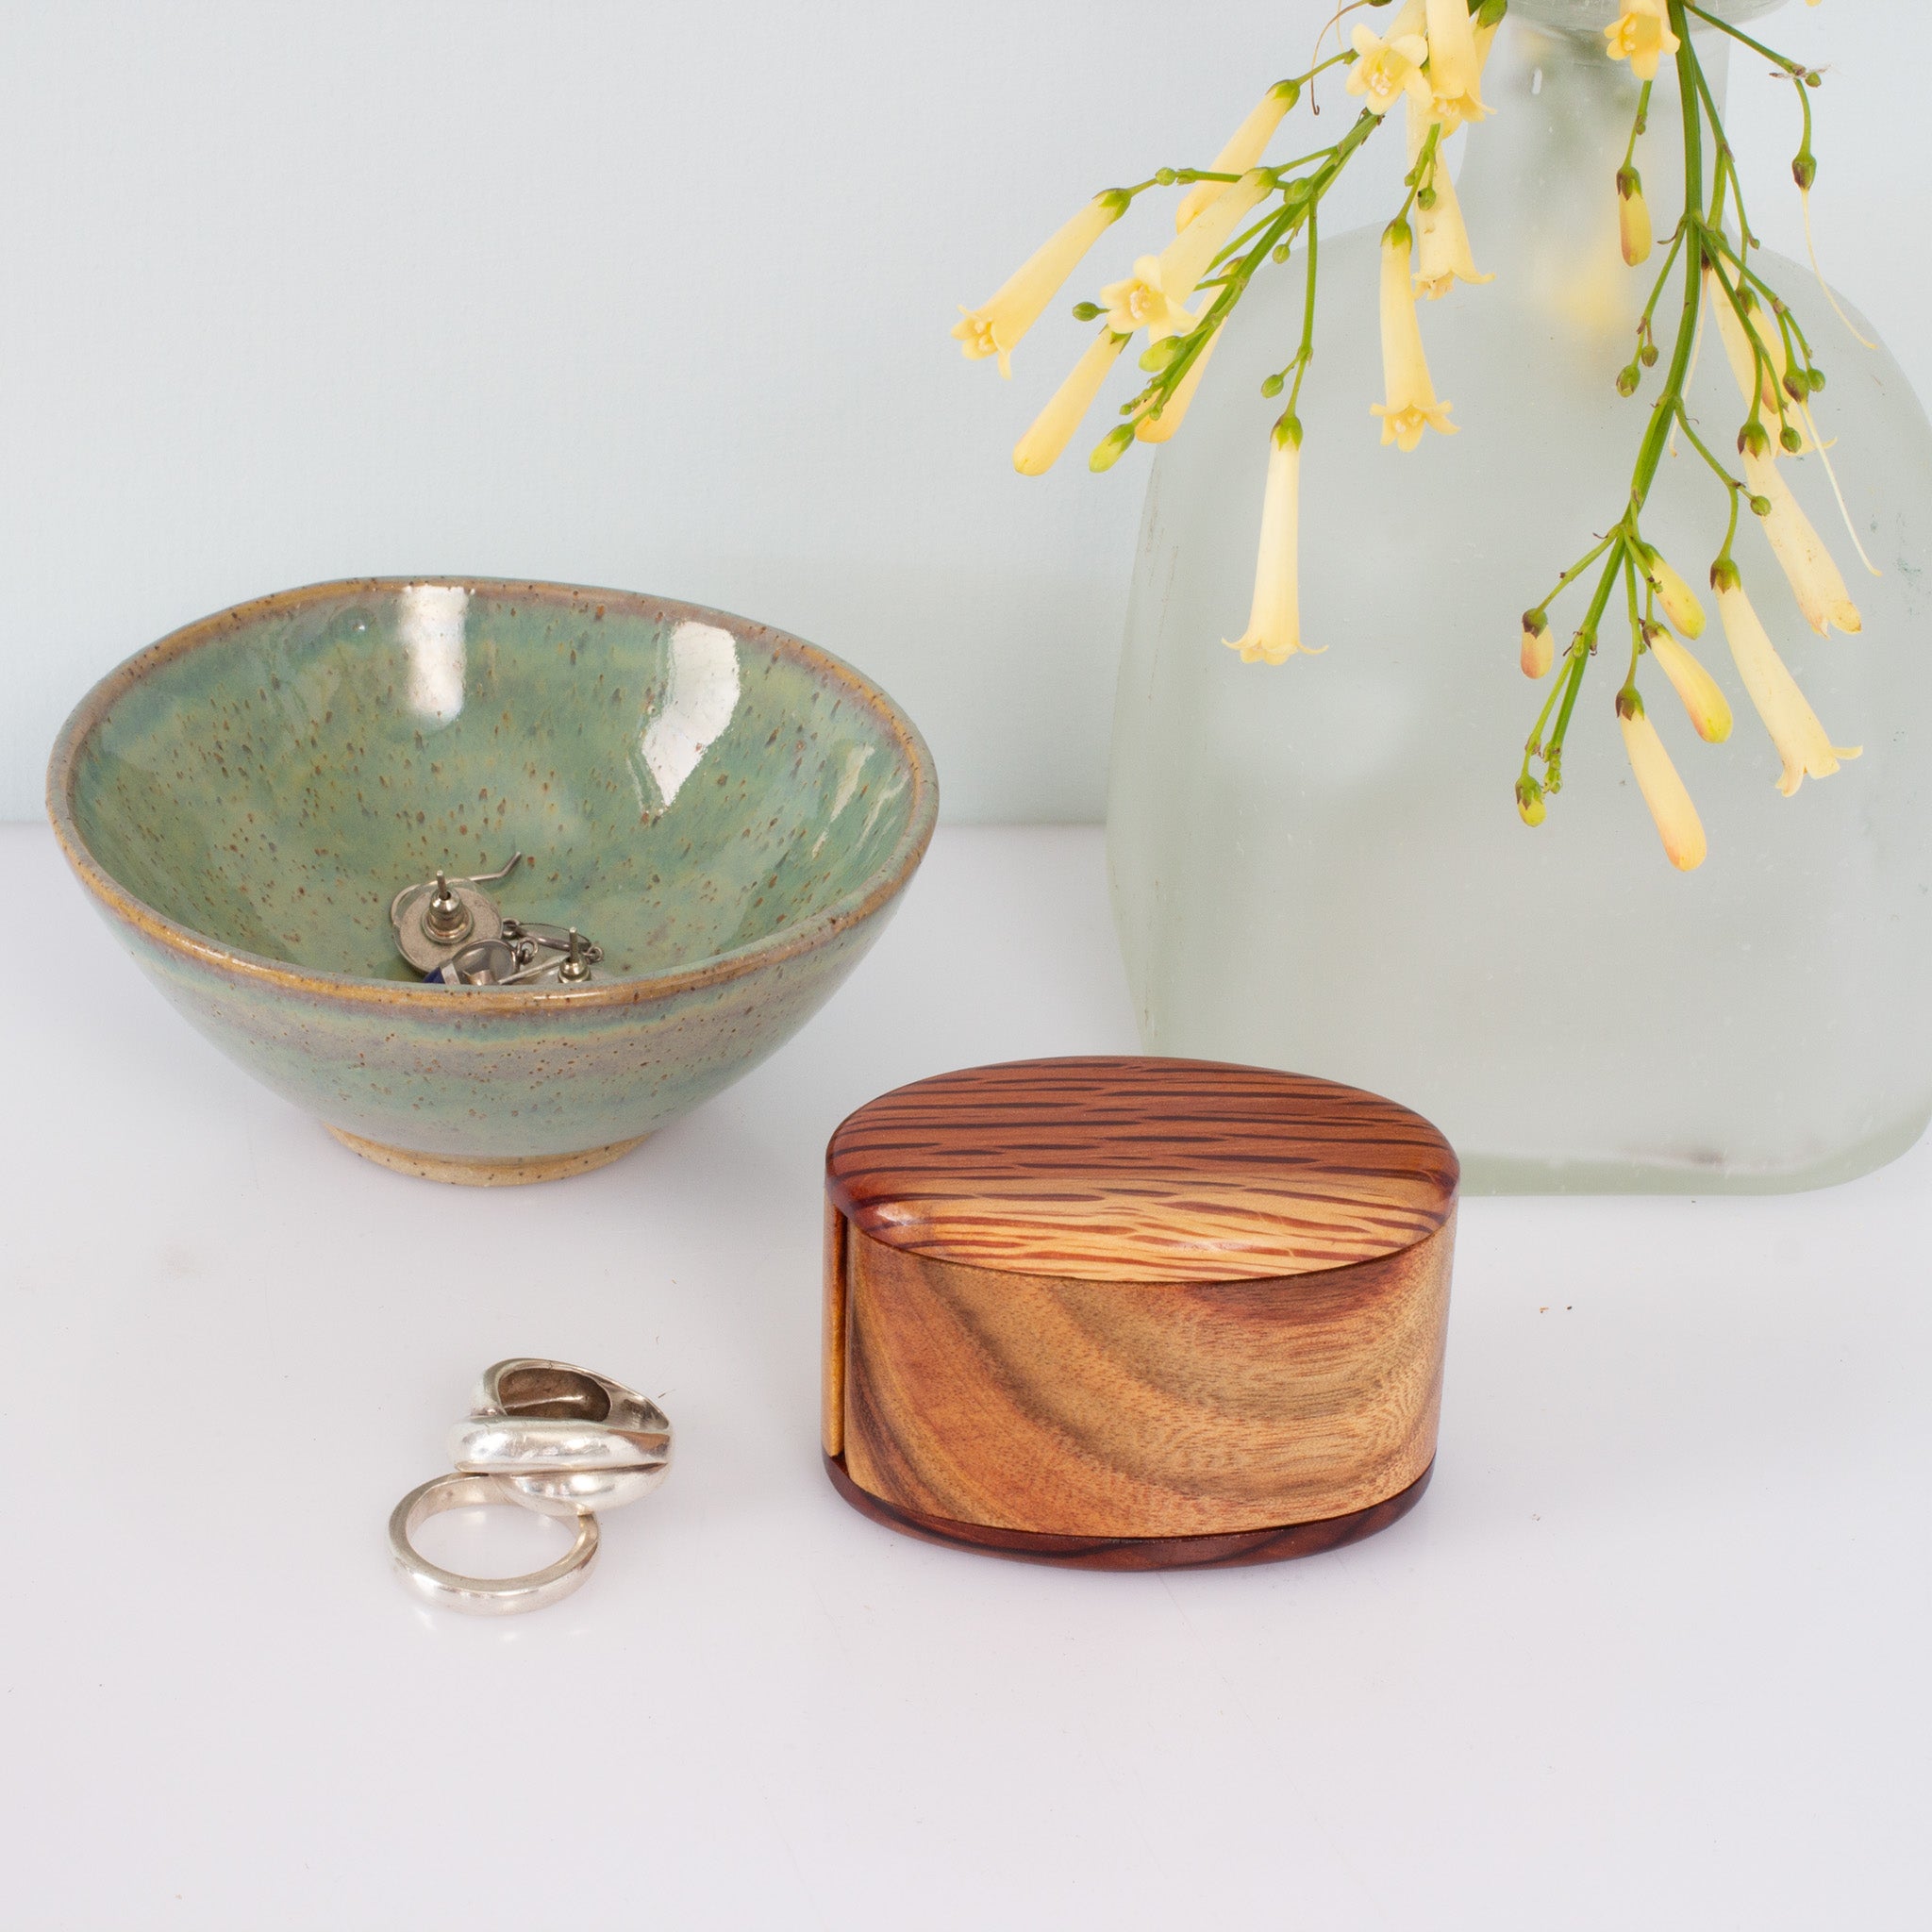 Small Oval Trinket Boxes